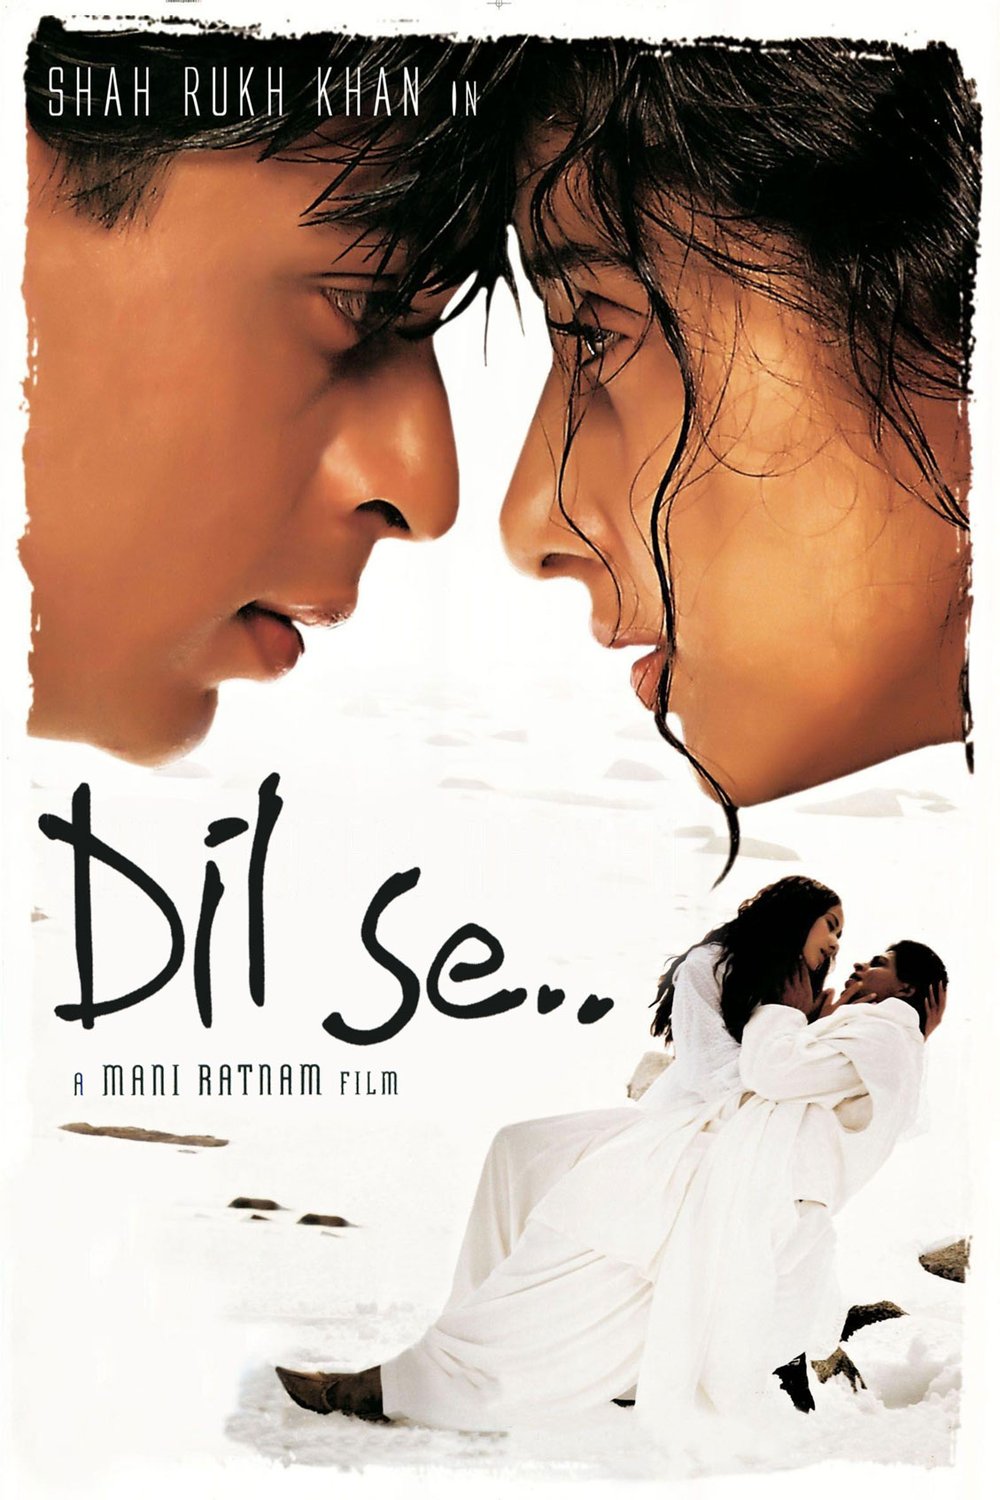 Telugu poster of the movie Dil Se..